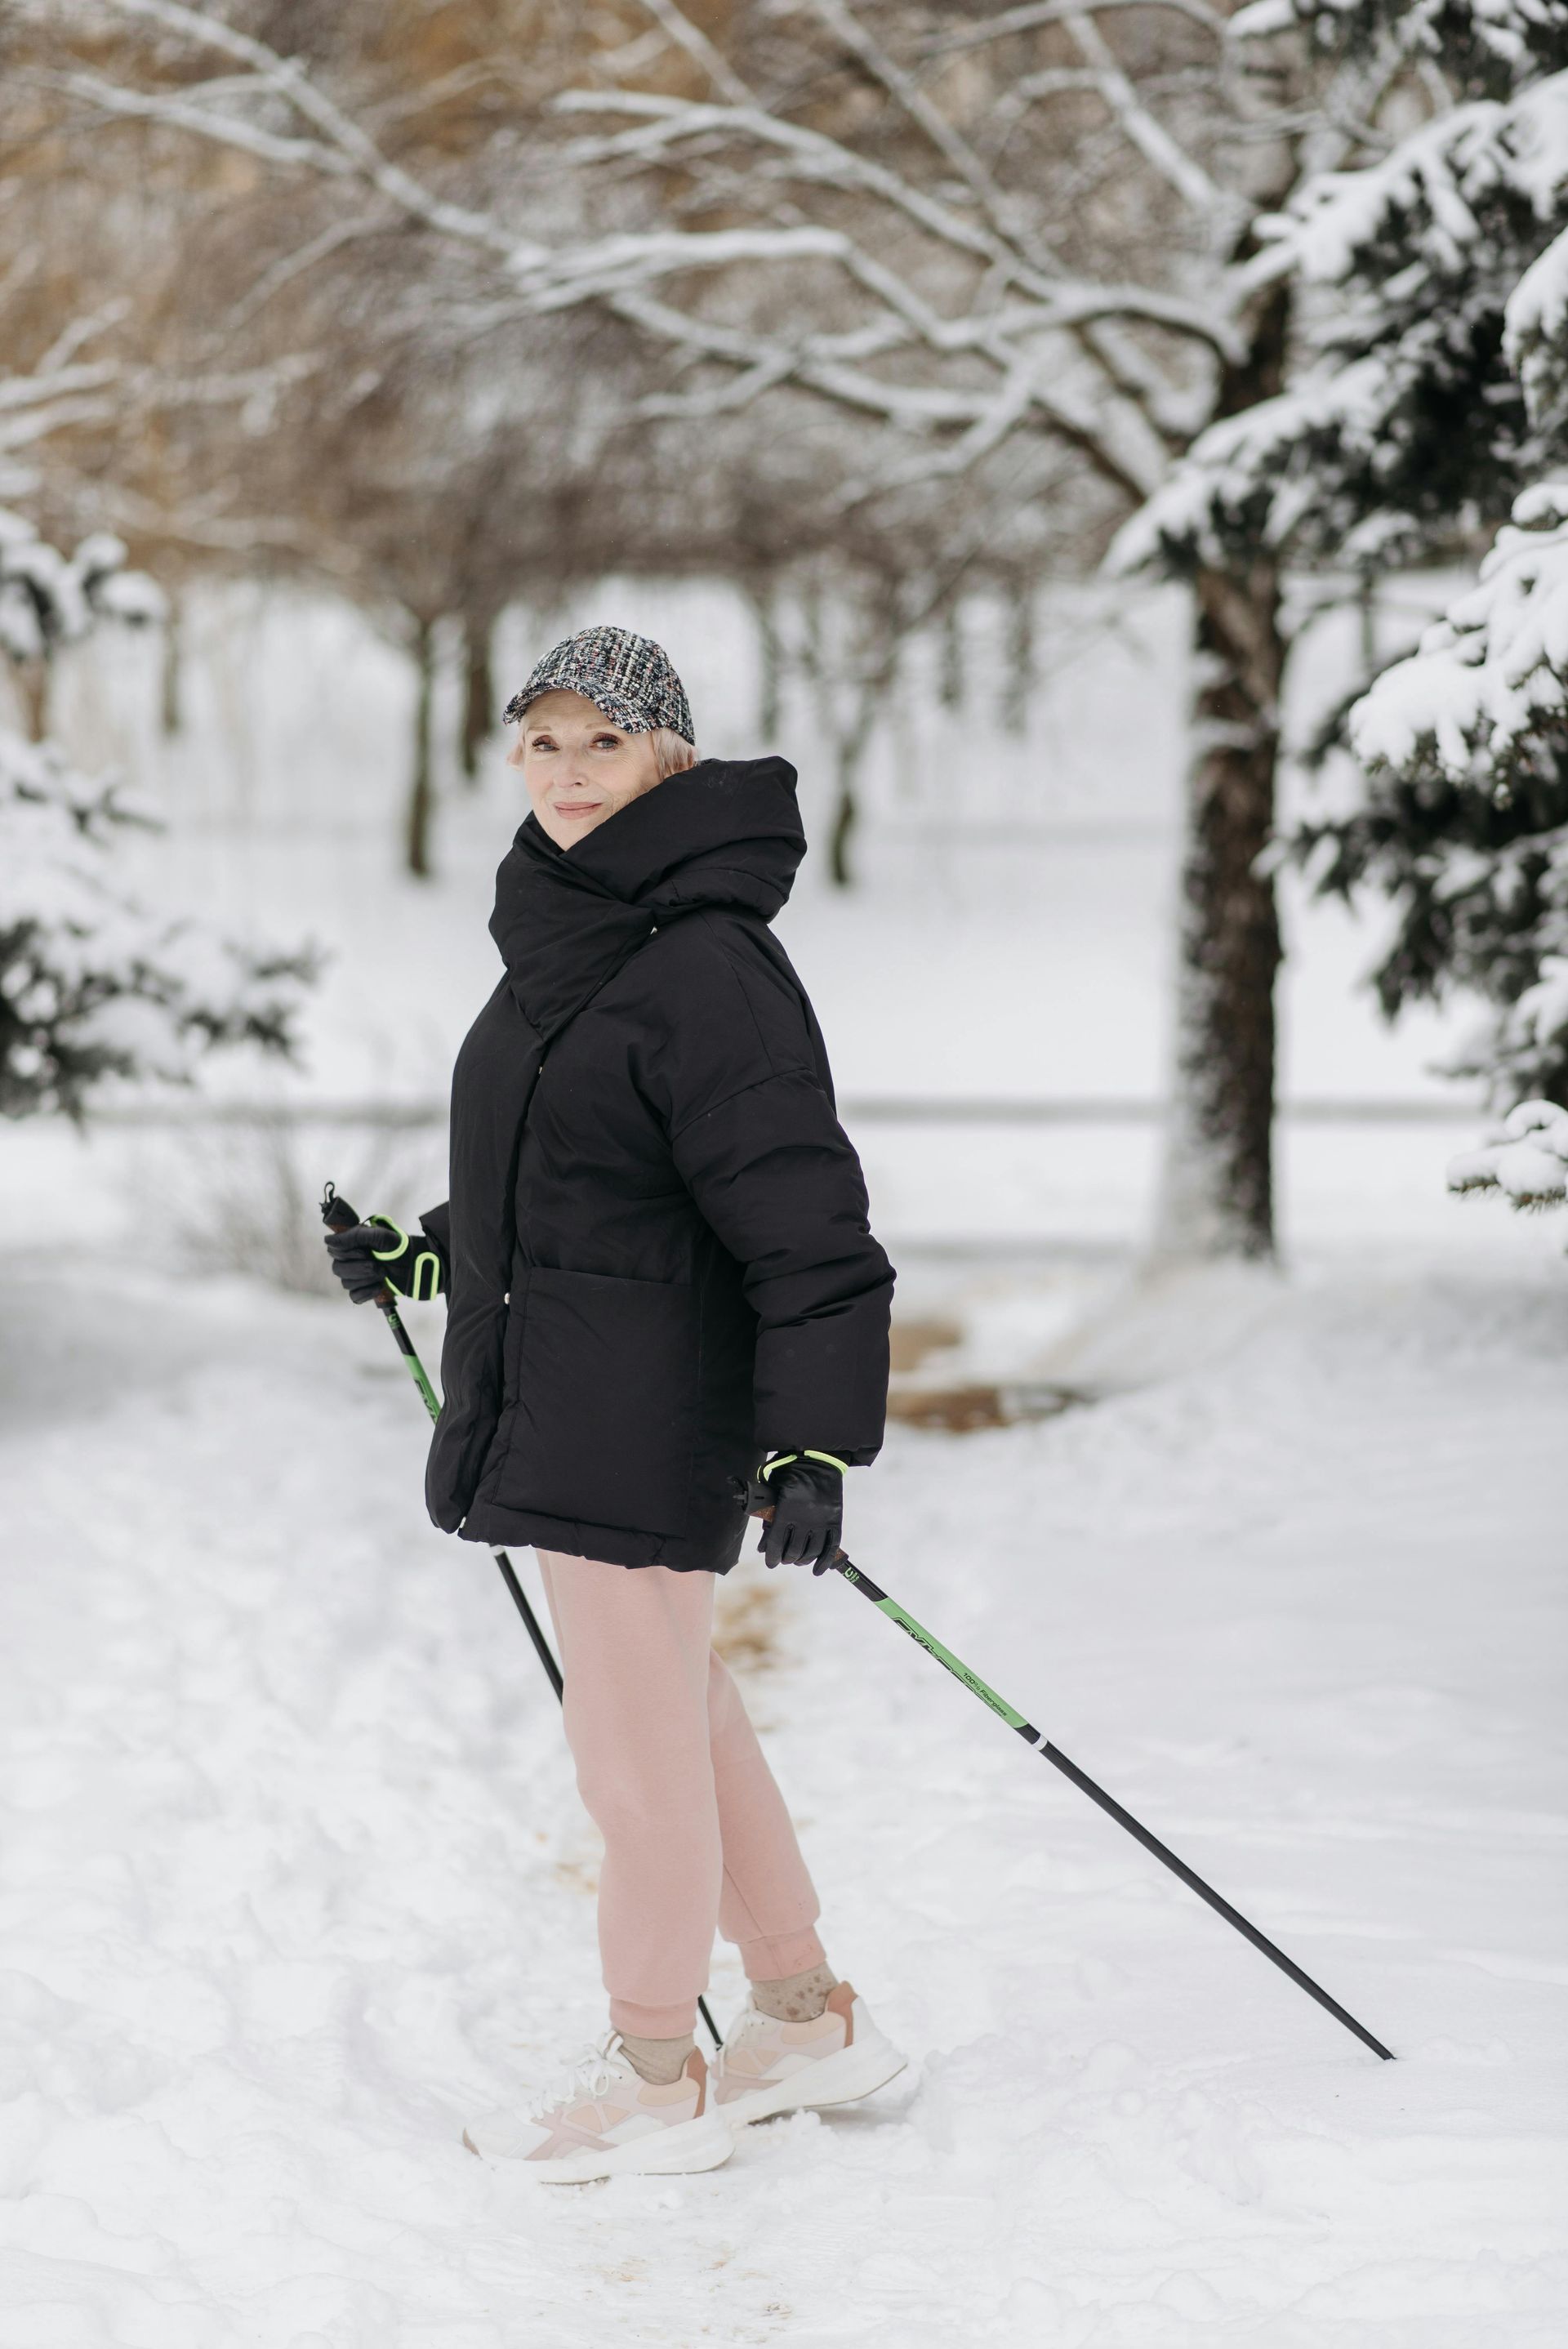 A woman is standing in the snow holding skis.